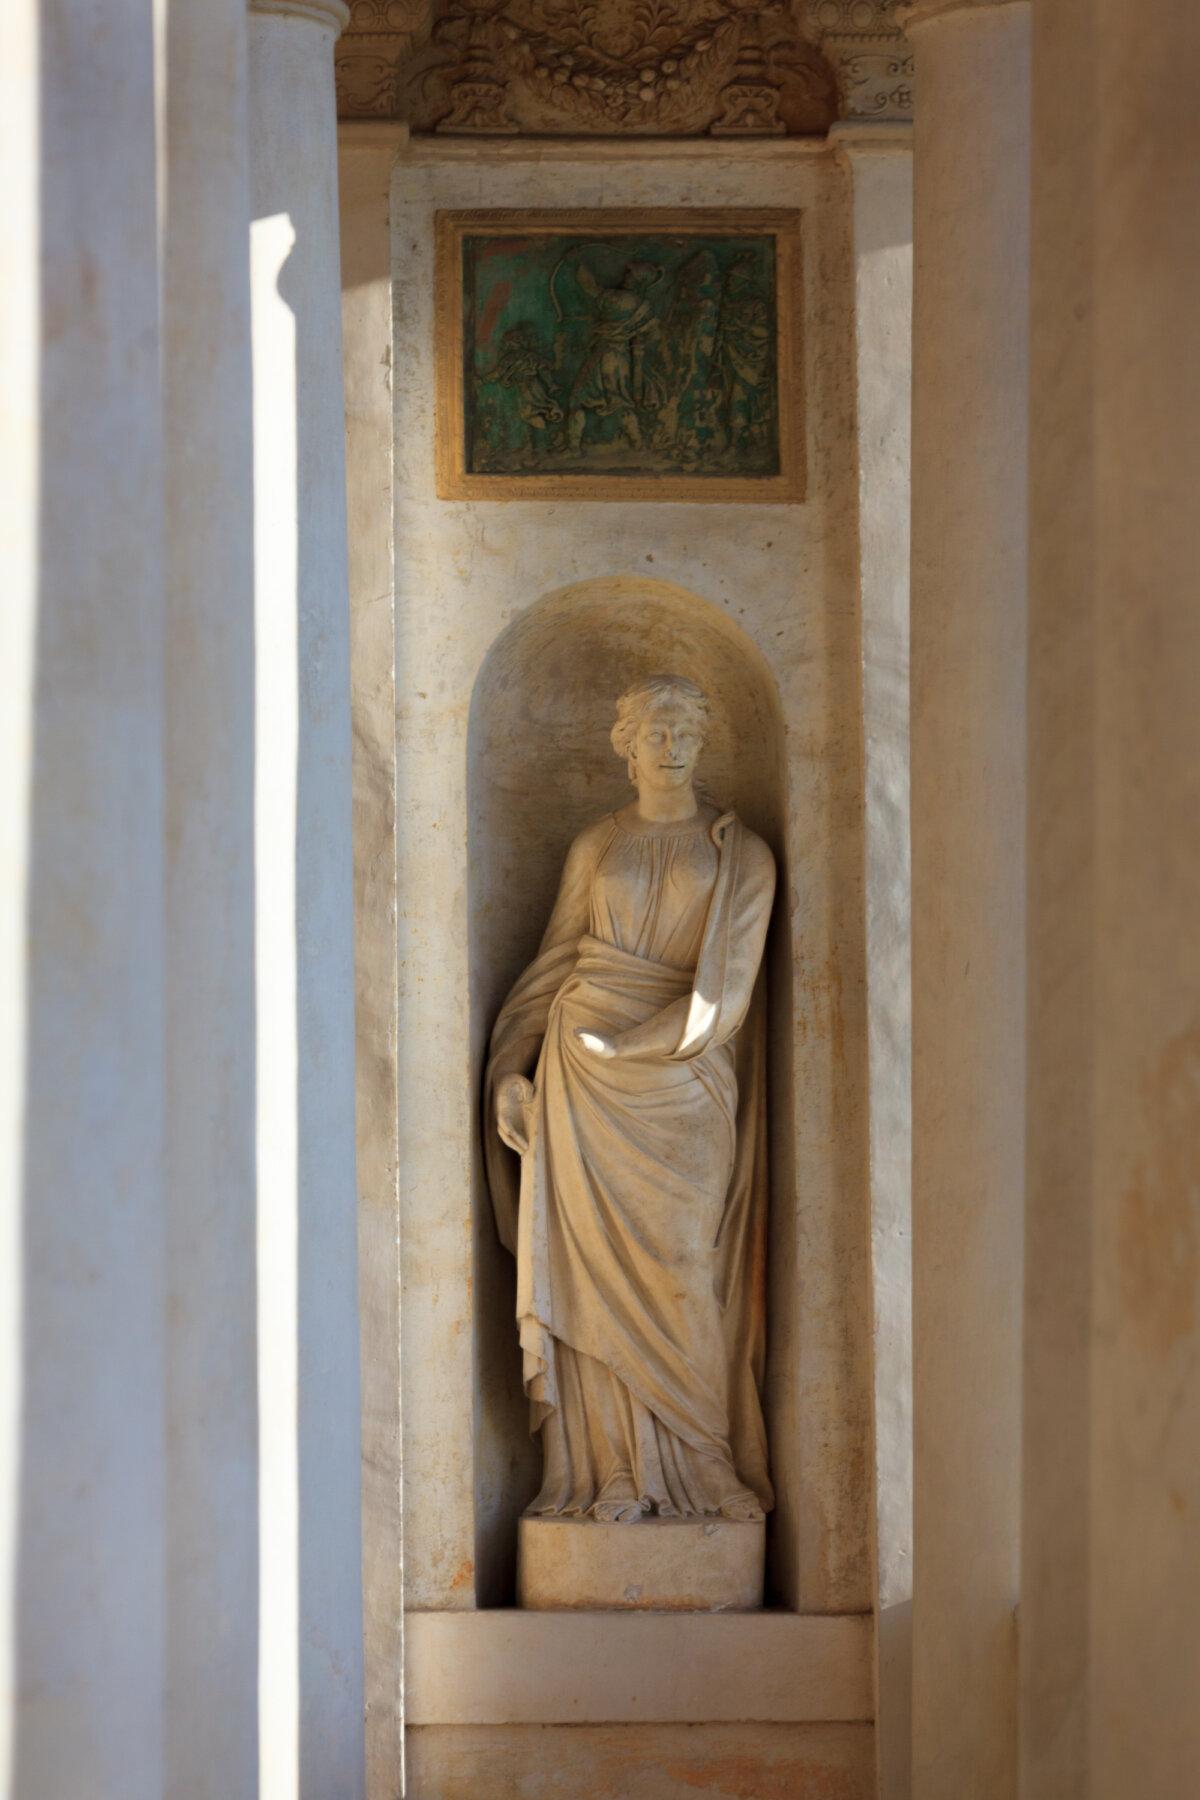 In the Loggia of David, set within a niche between the rows of columns, Virtue, in the guise of a maiden, stands, gracefully animating the space. (J. H. Smith)